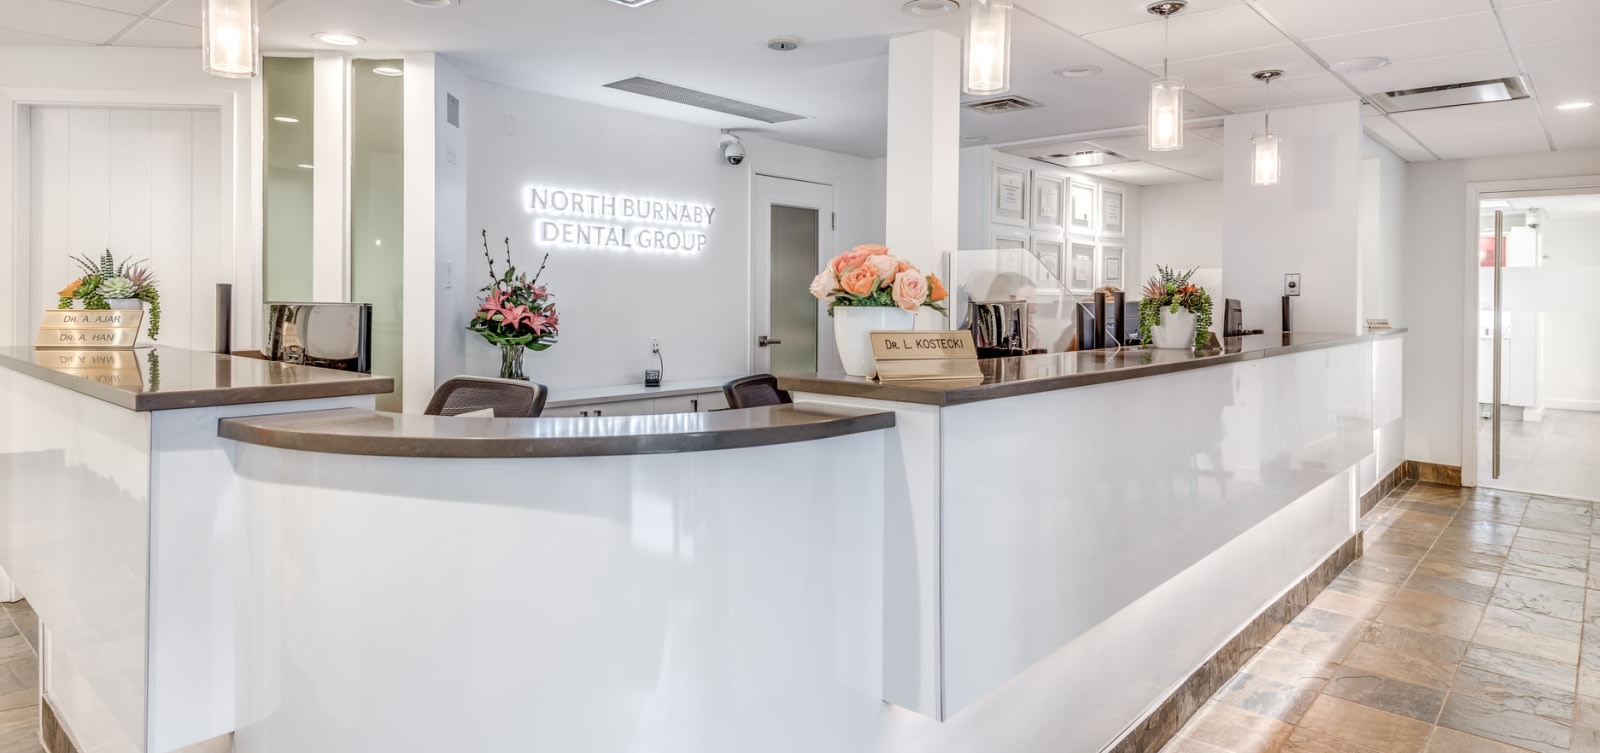 North Burnaby Dental Group in Burnaby, BC